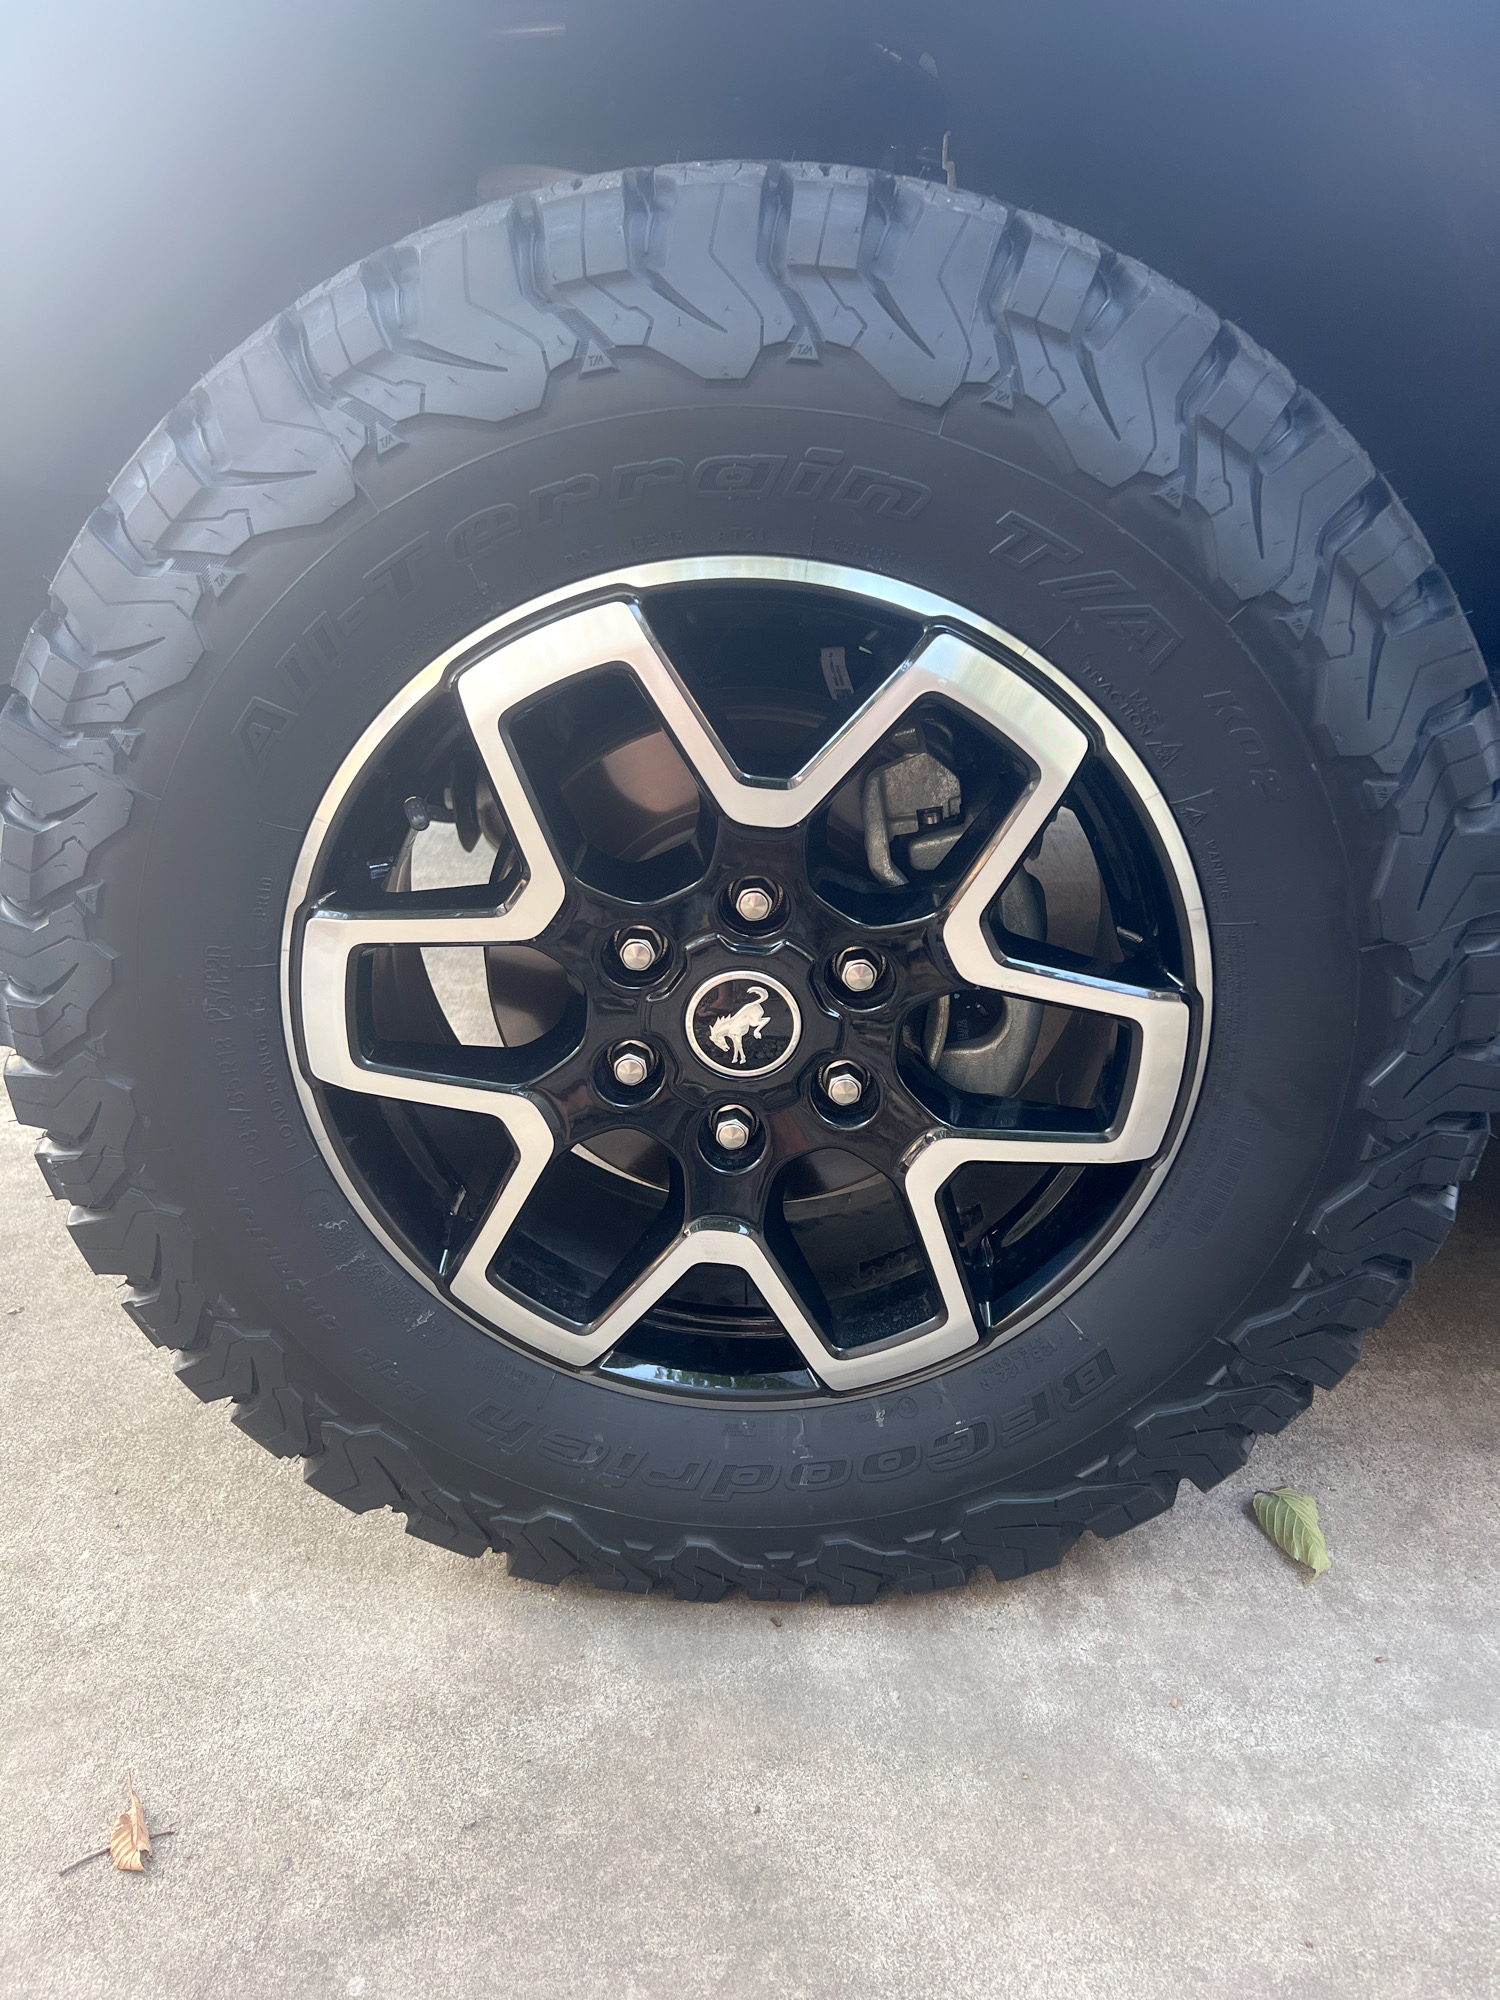 Ford Bronco Tires and Wheels. Educate Me. 21363570-481B-4026-9A16-1370DF72FD3F